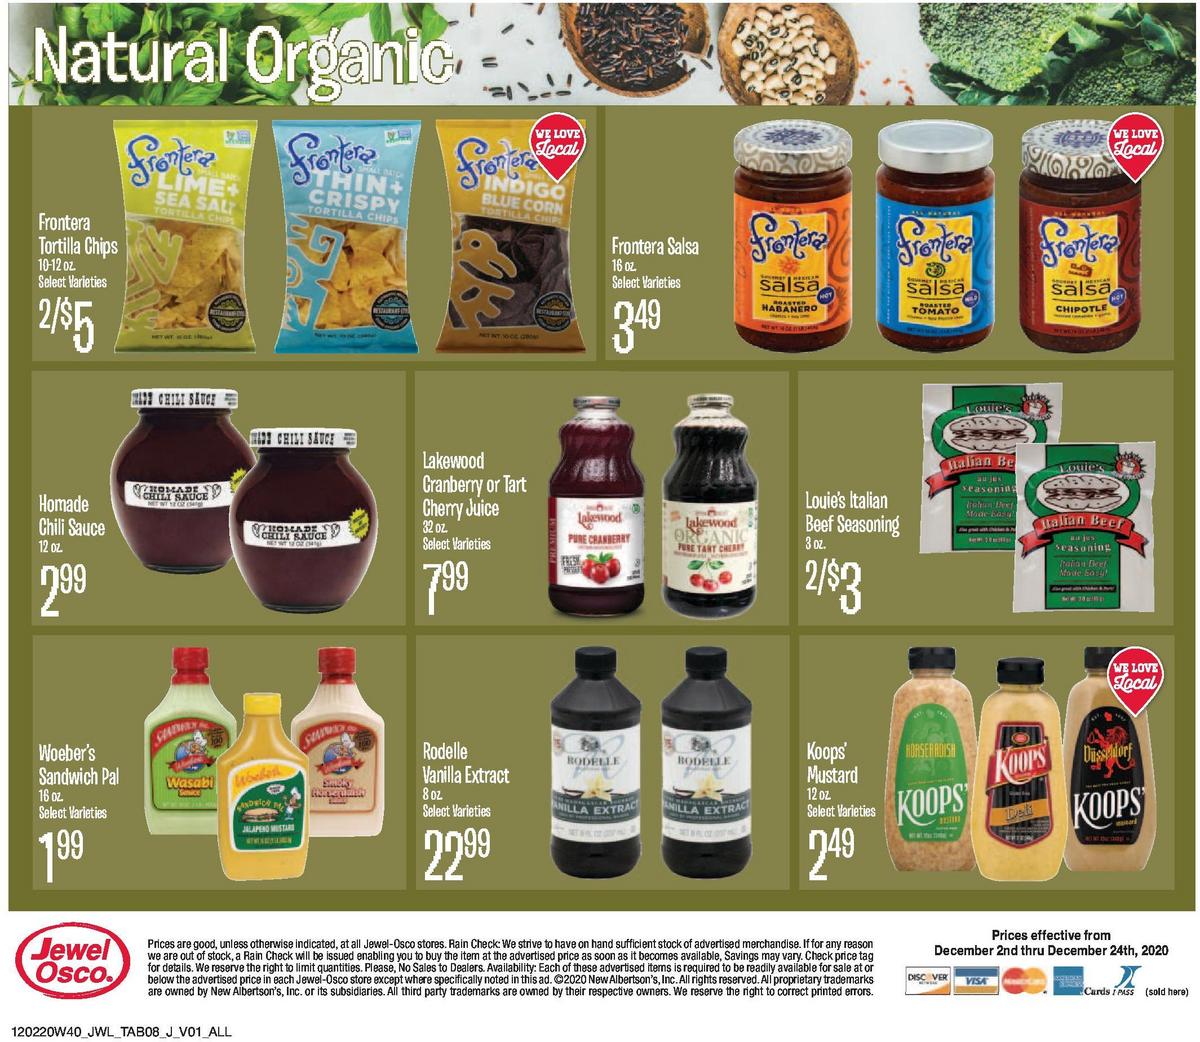 Jewel Osco Speciality Items and Seasonal Favorites Weekly Ad from December 2